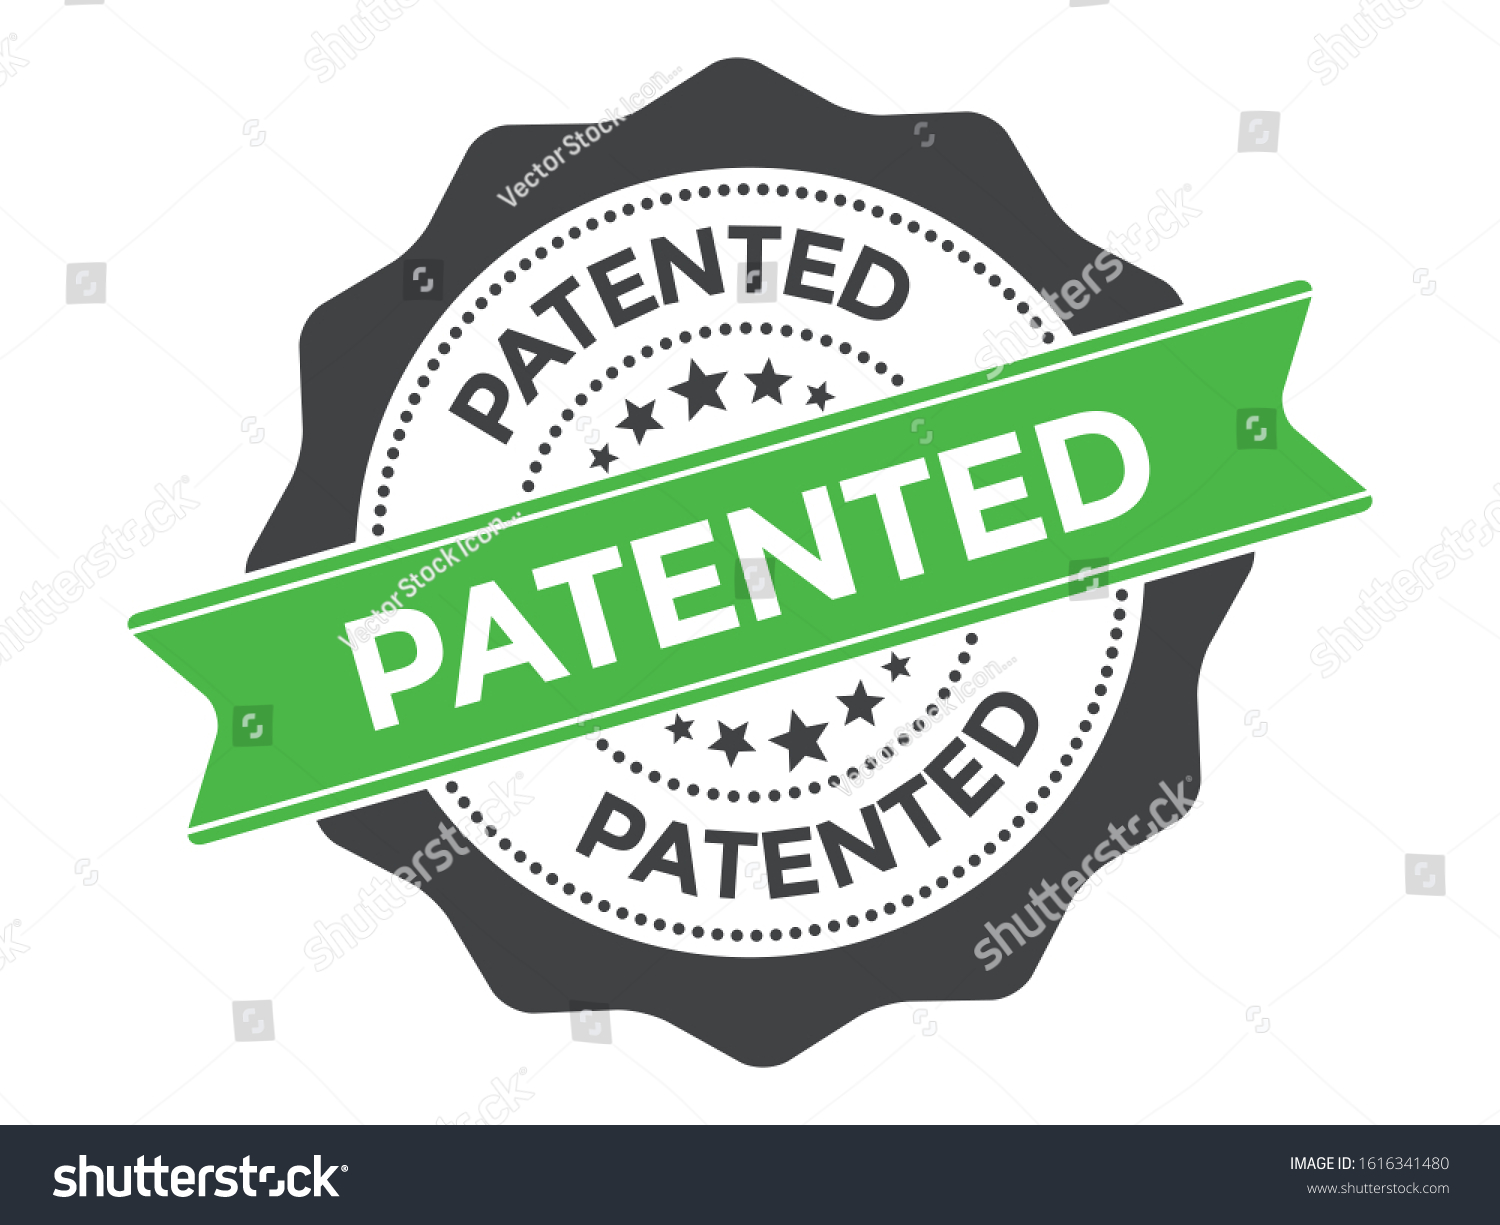 Patented Stamp Vector Over White Background Stock Vector Royalty Free 1616341480 Shutterstock 9257